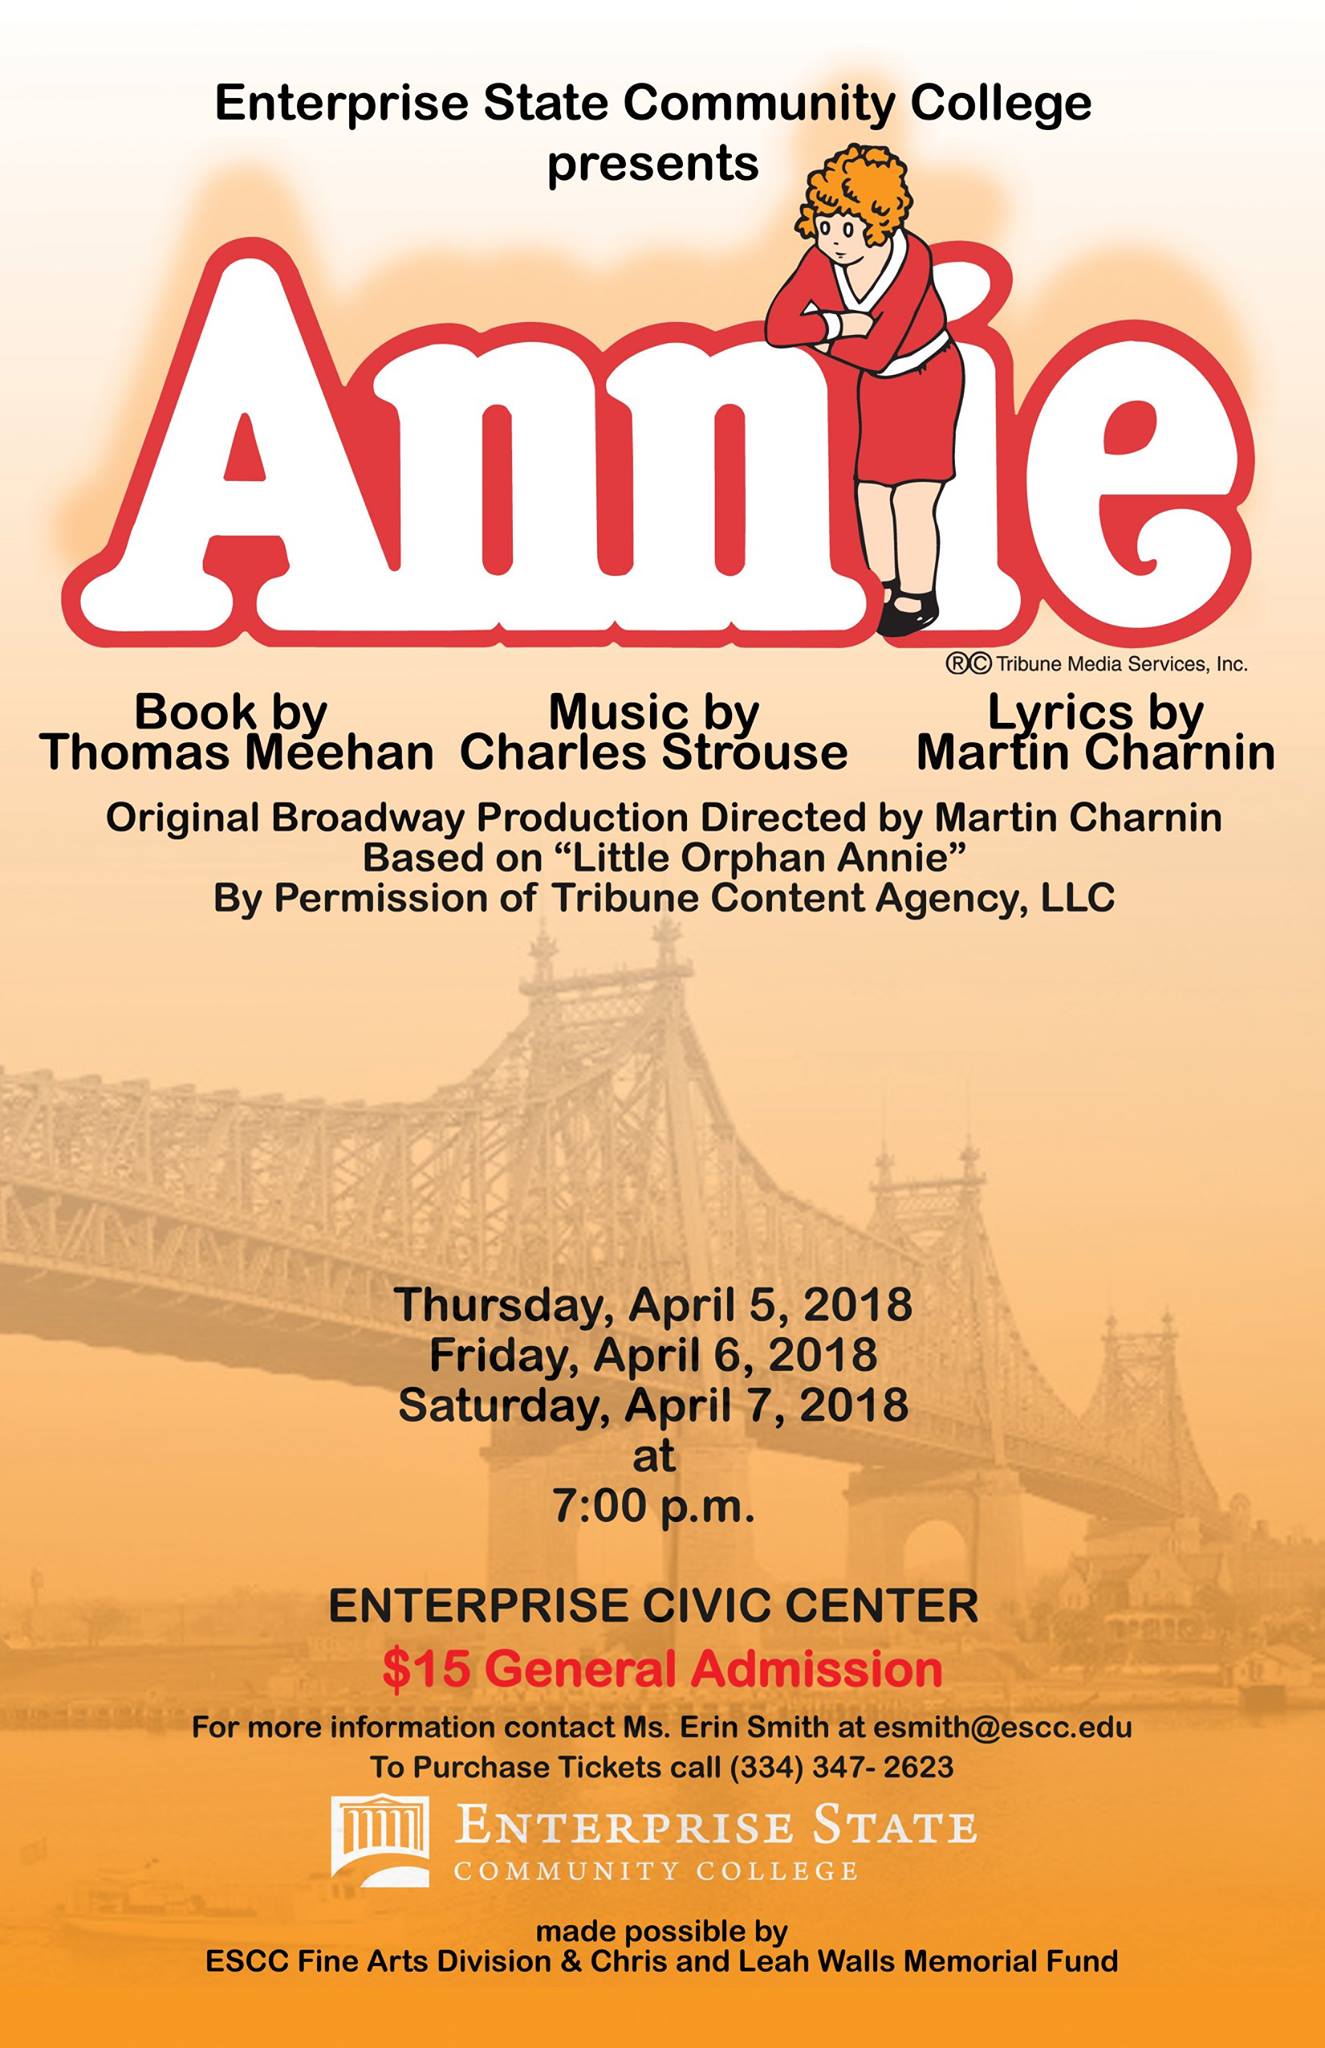 ESCC Fine Arts Division will bring the entertaining and lovable musical, Annie, to life in April